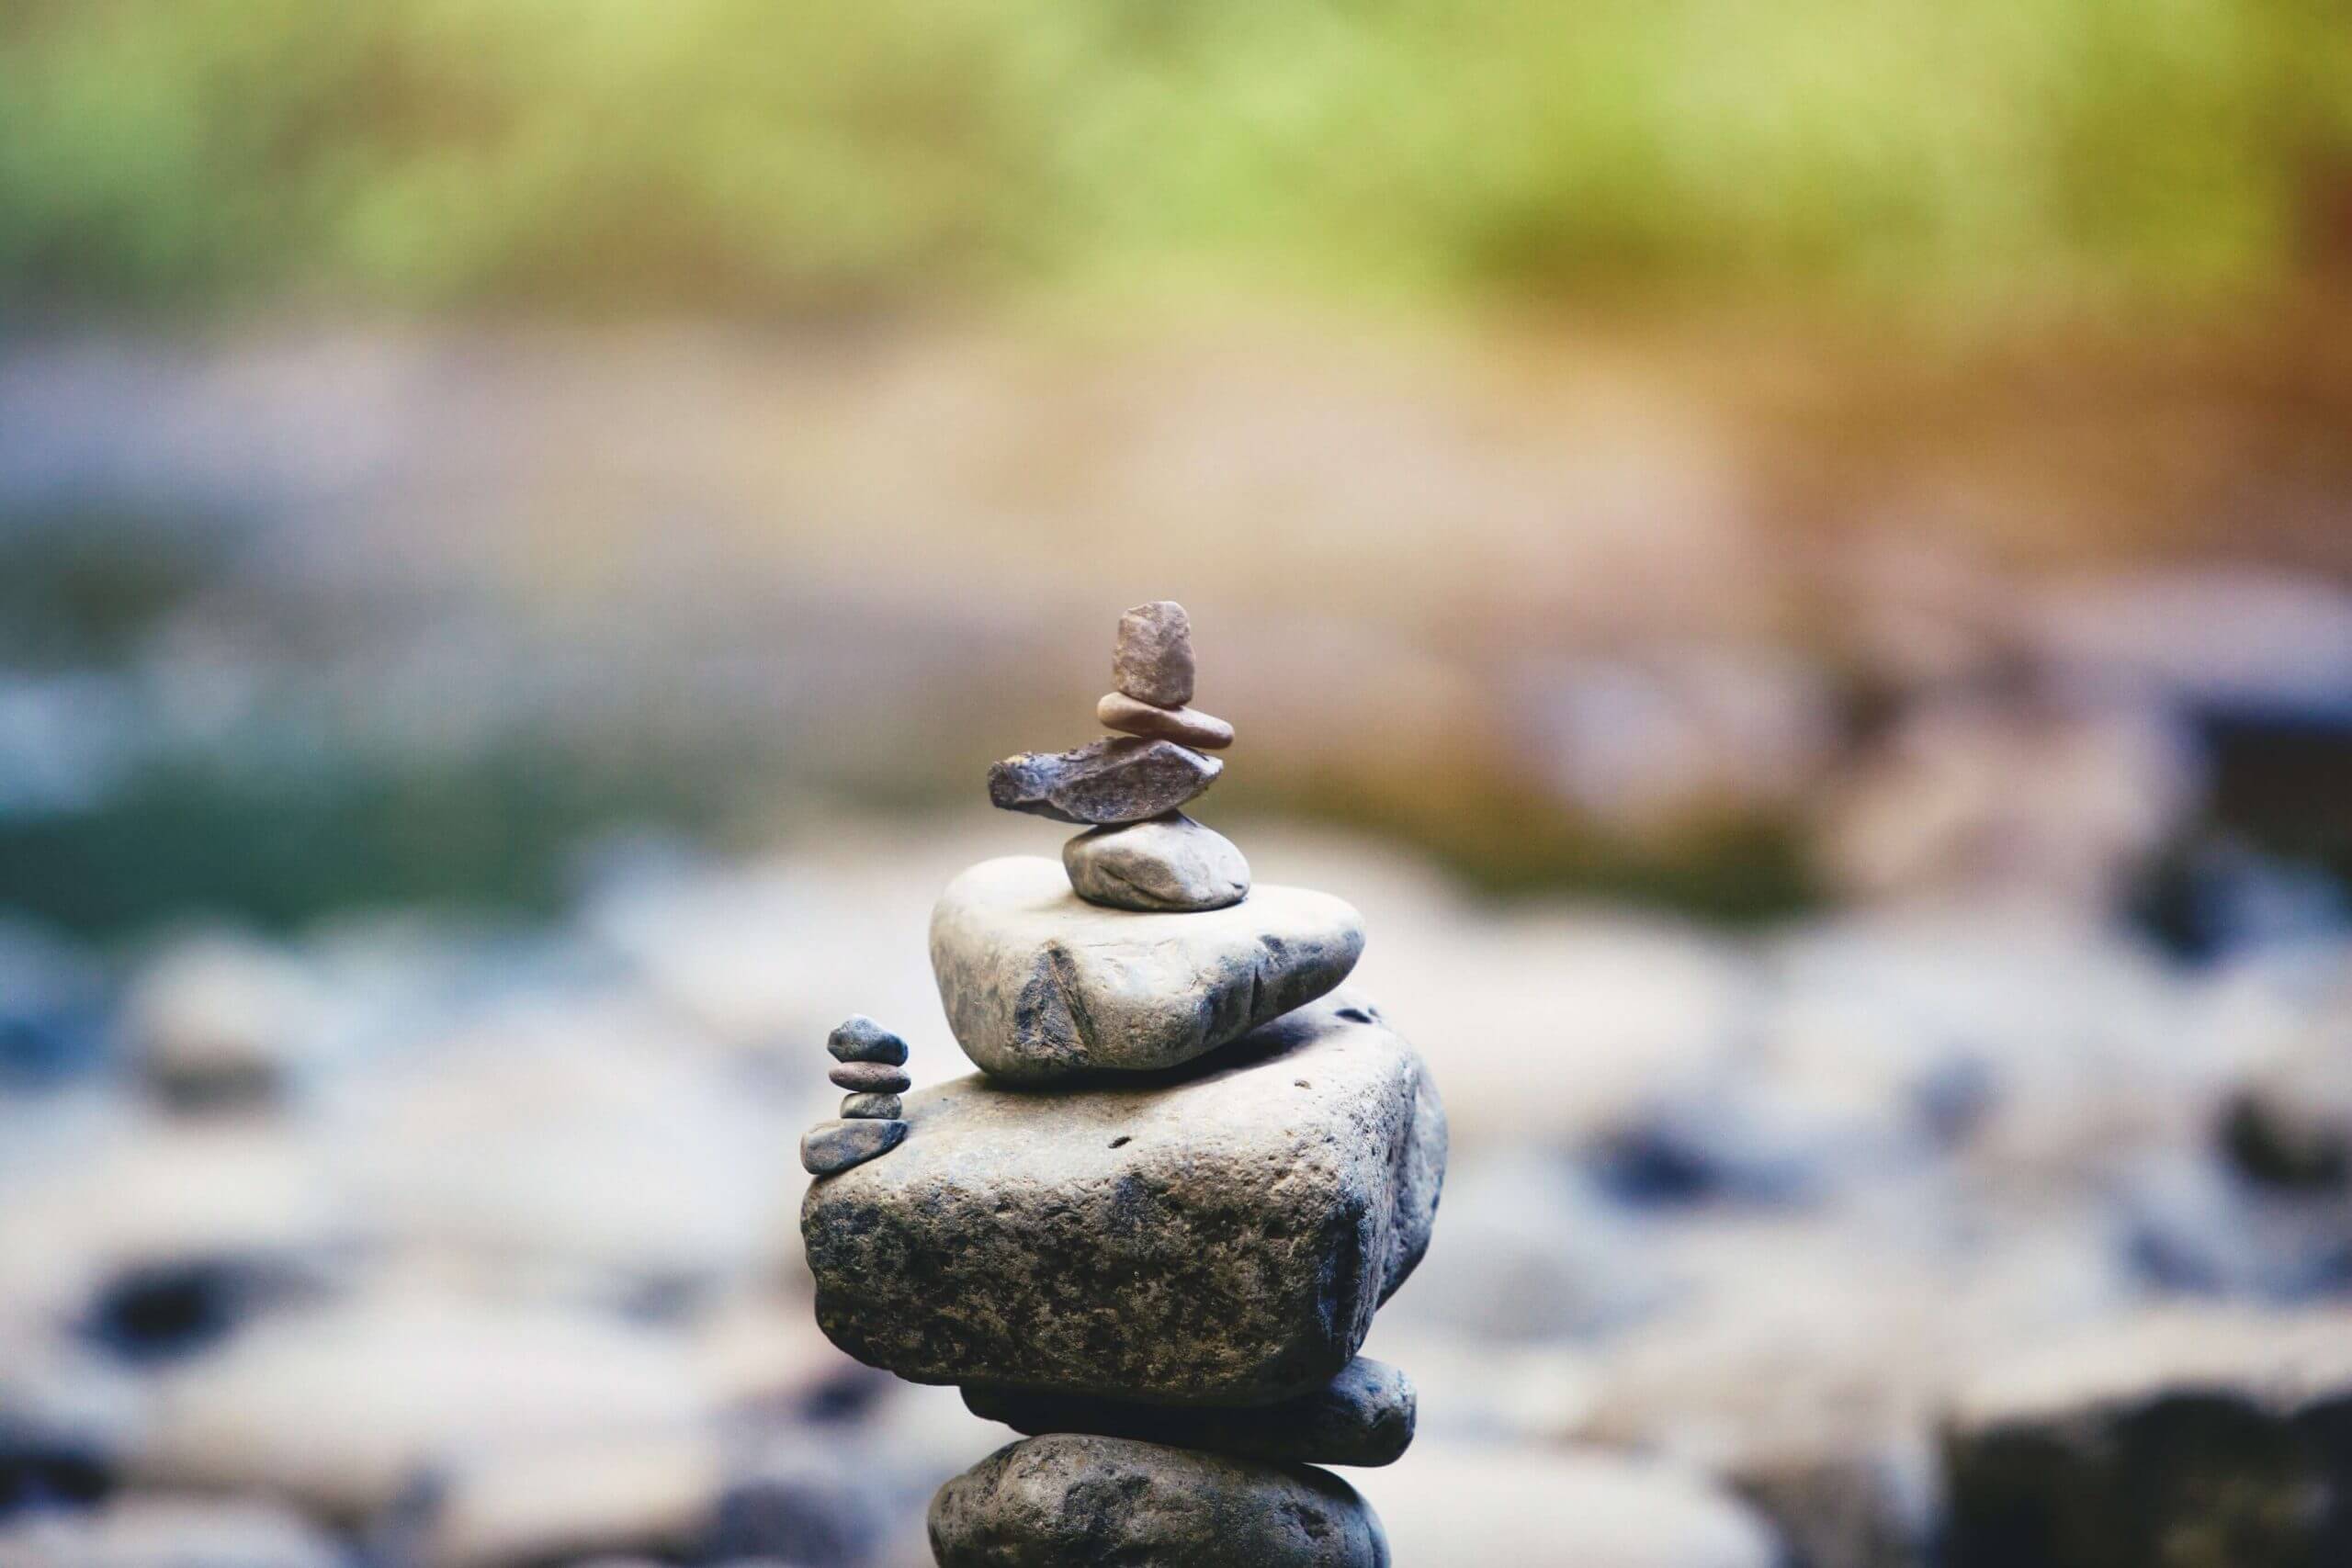 Beautifully balanced pile of stones in front of a creek